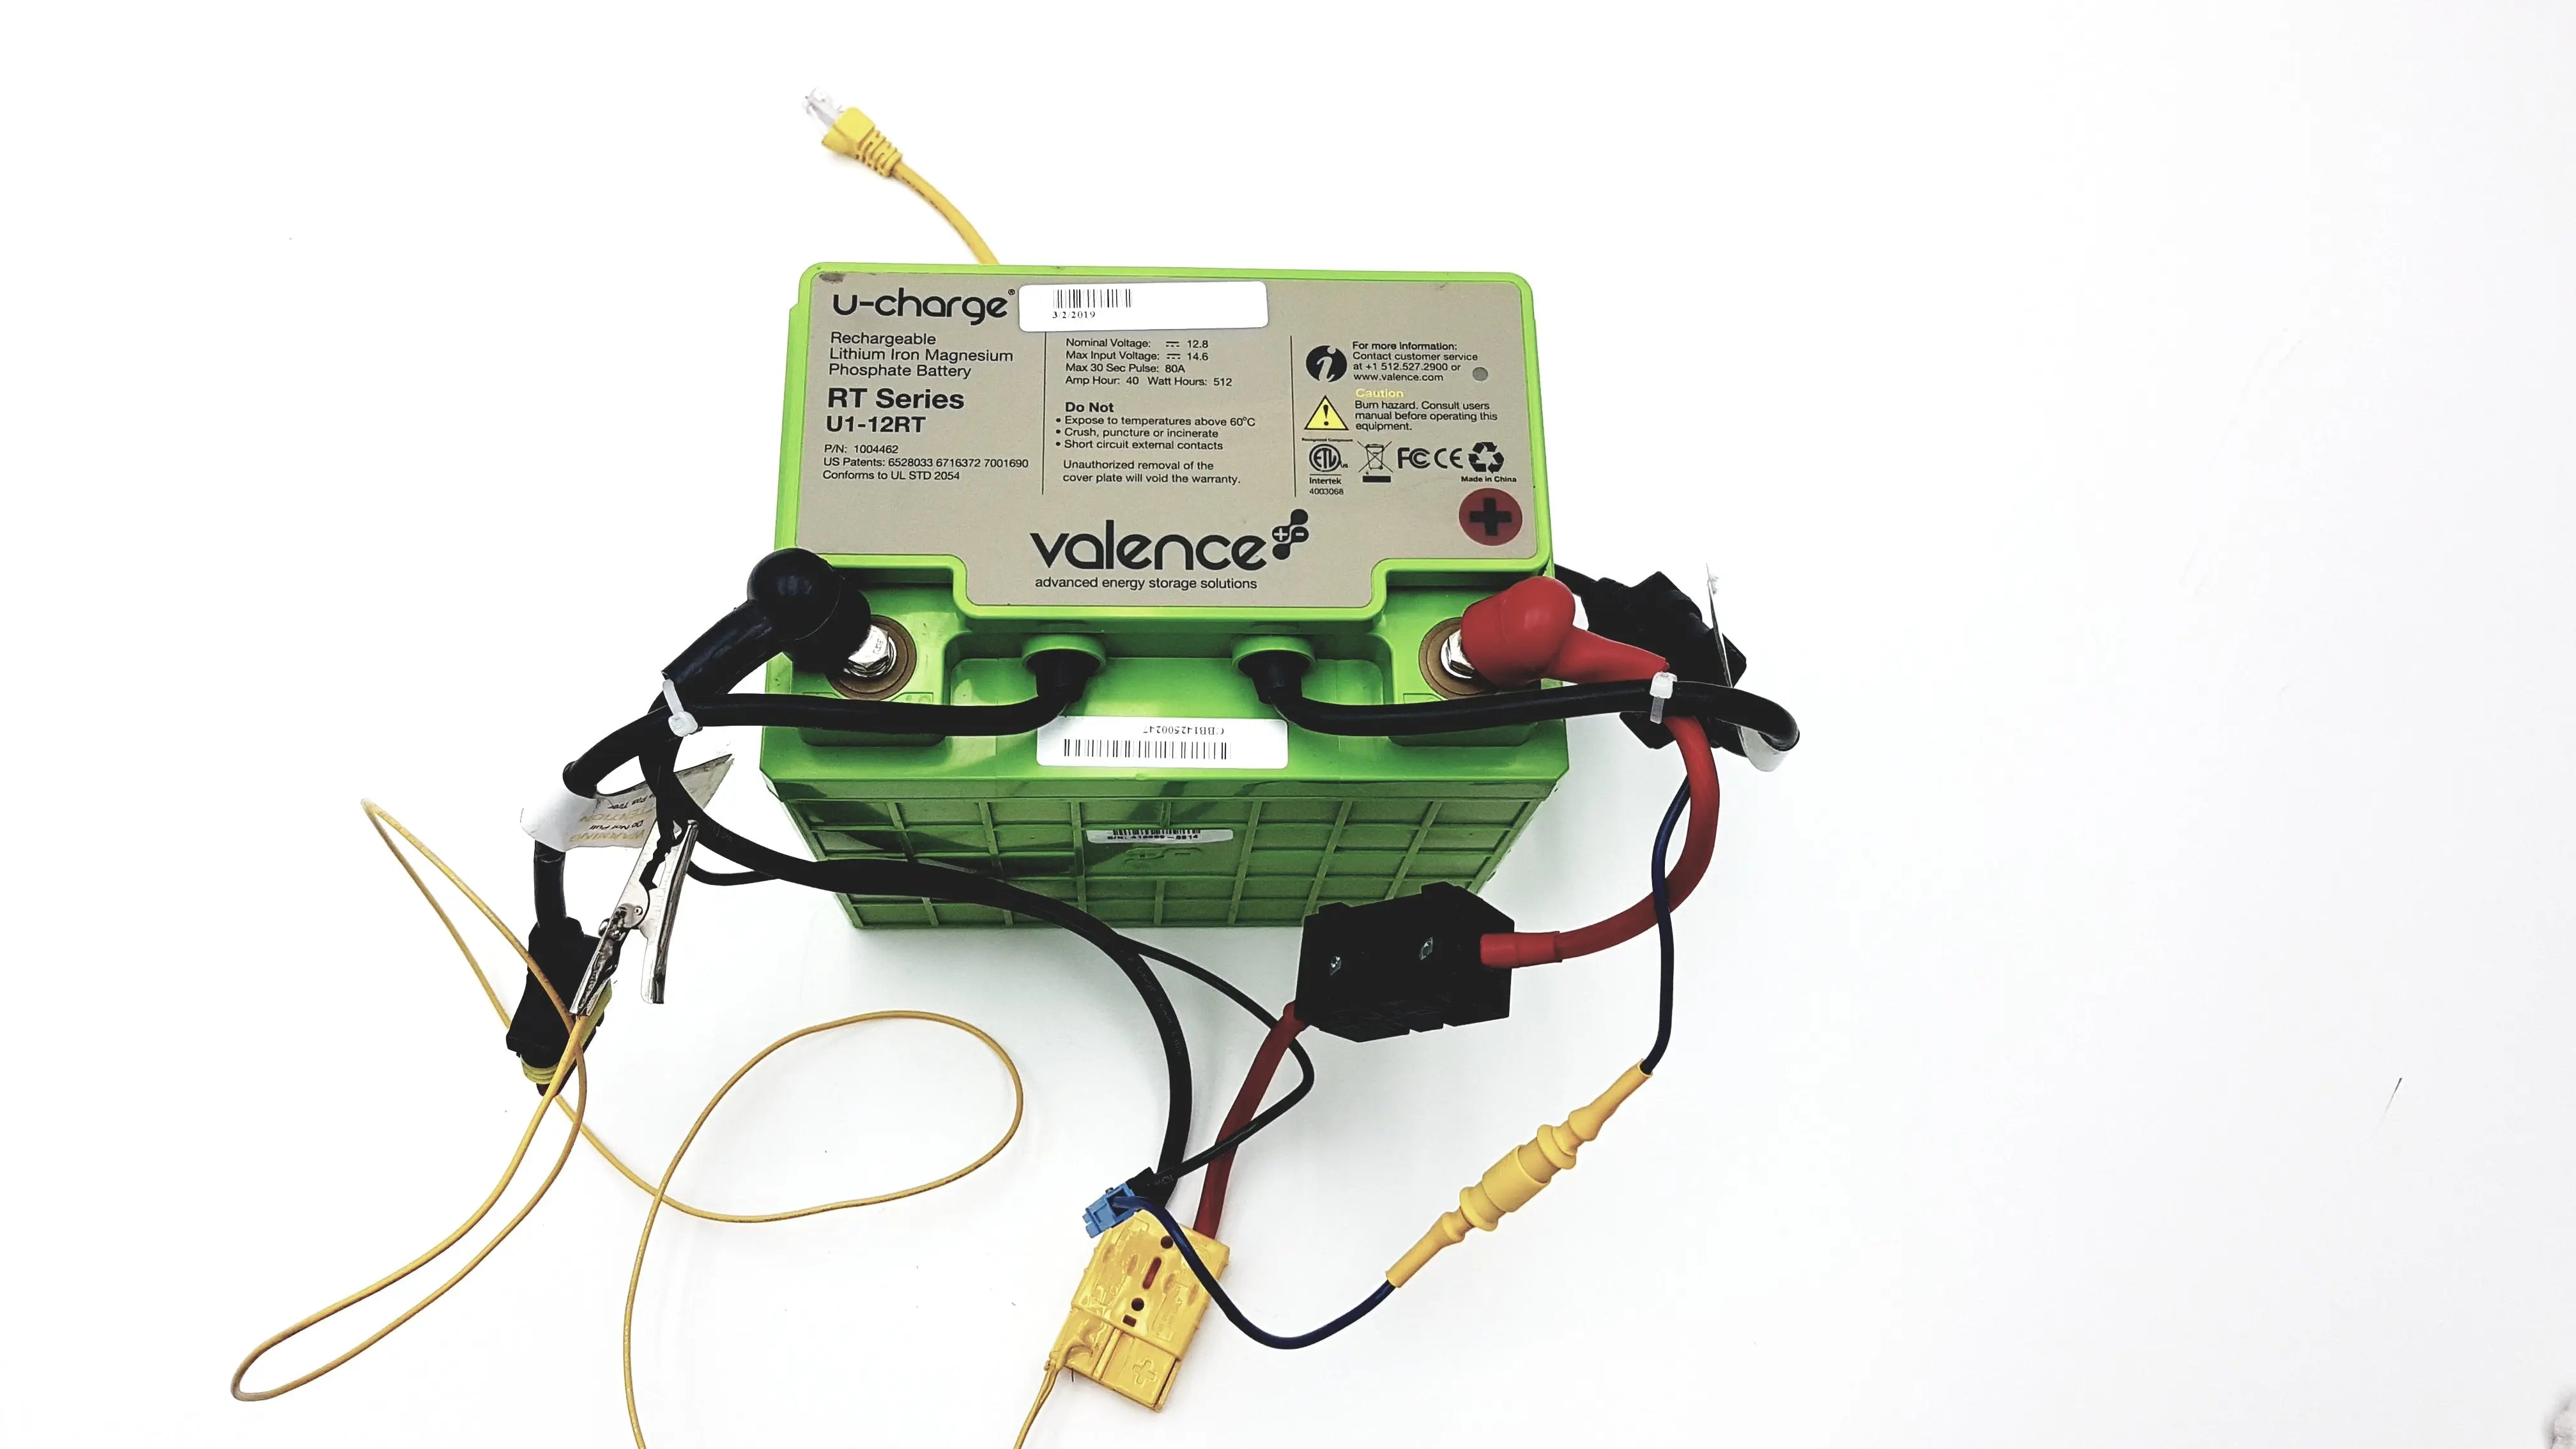 Load image into Gallery viewer, A Biomedical Service Valence RT Series U1-12RT Battery Pack 12.8V 80A 380.00